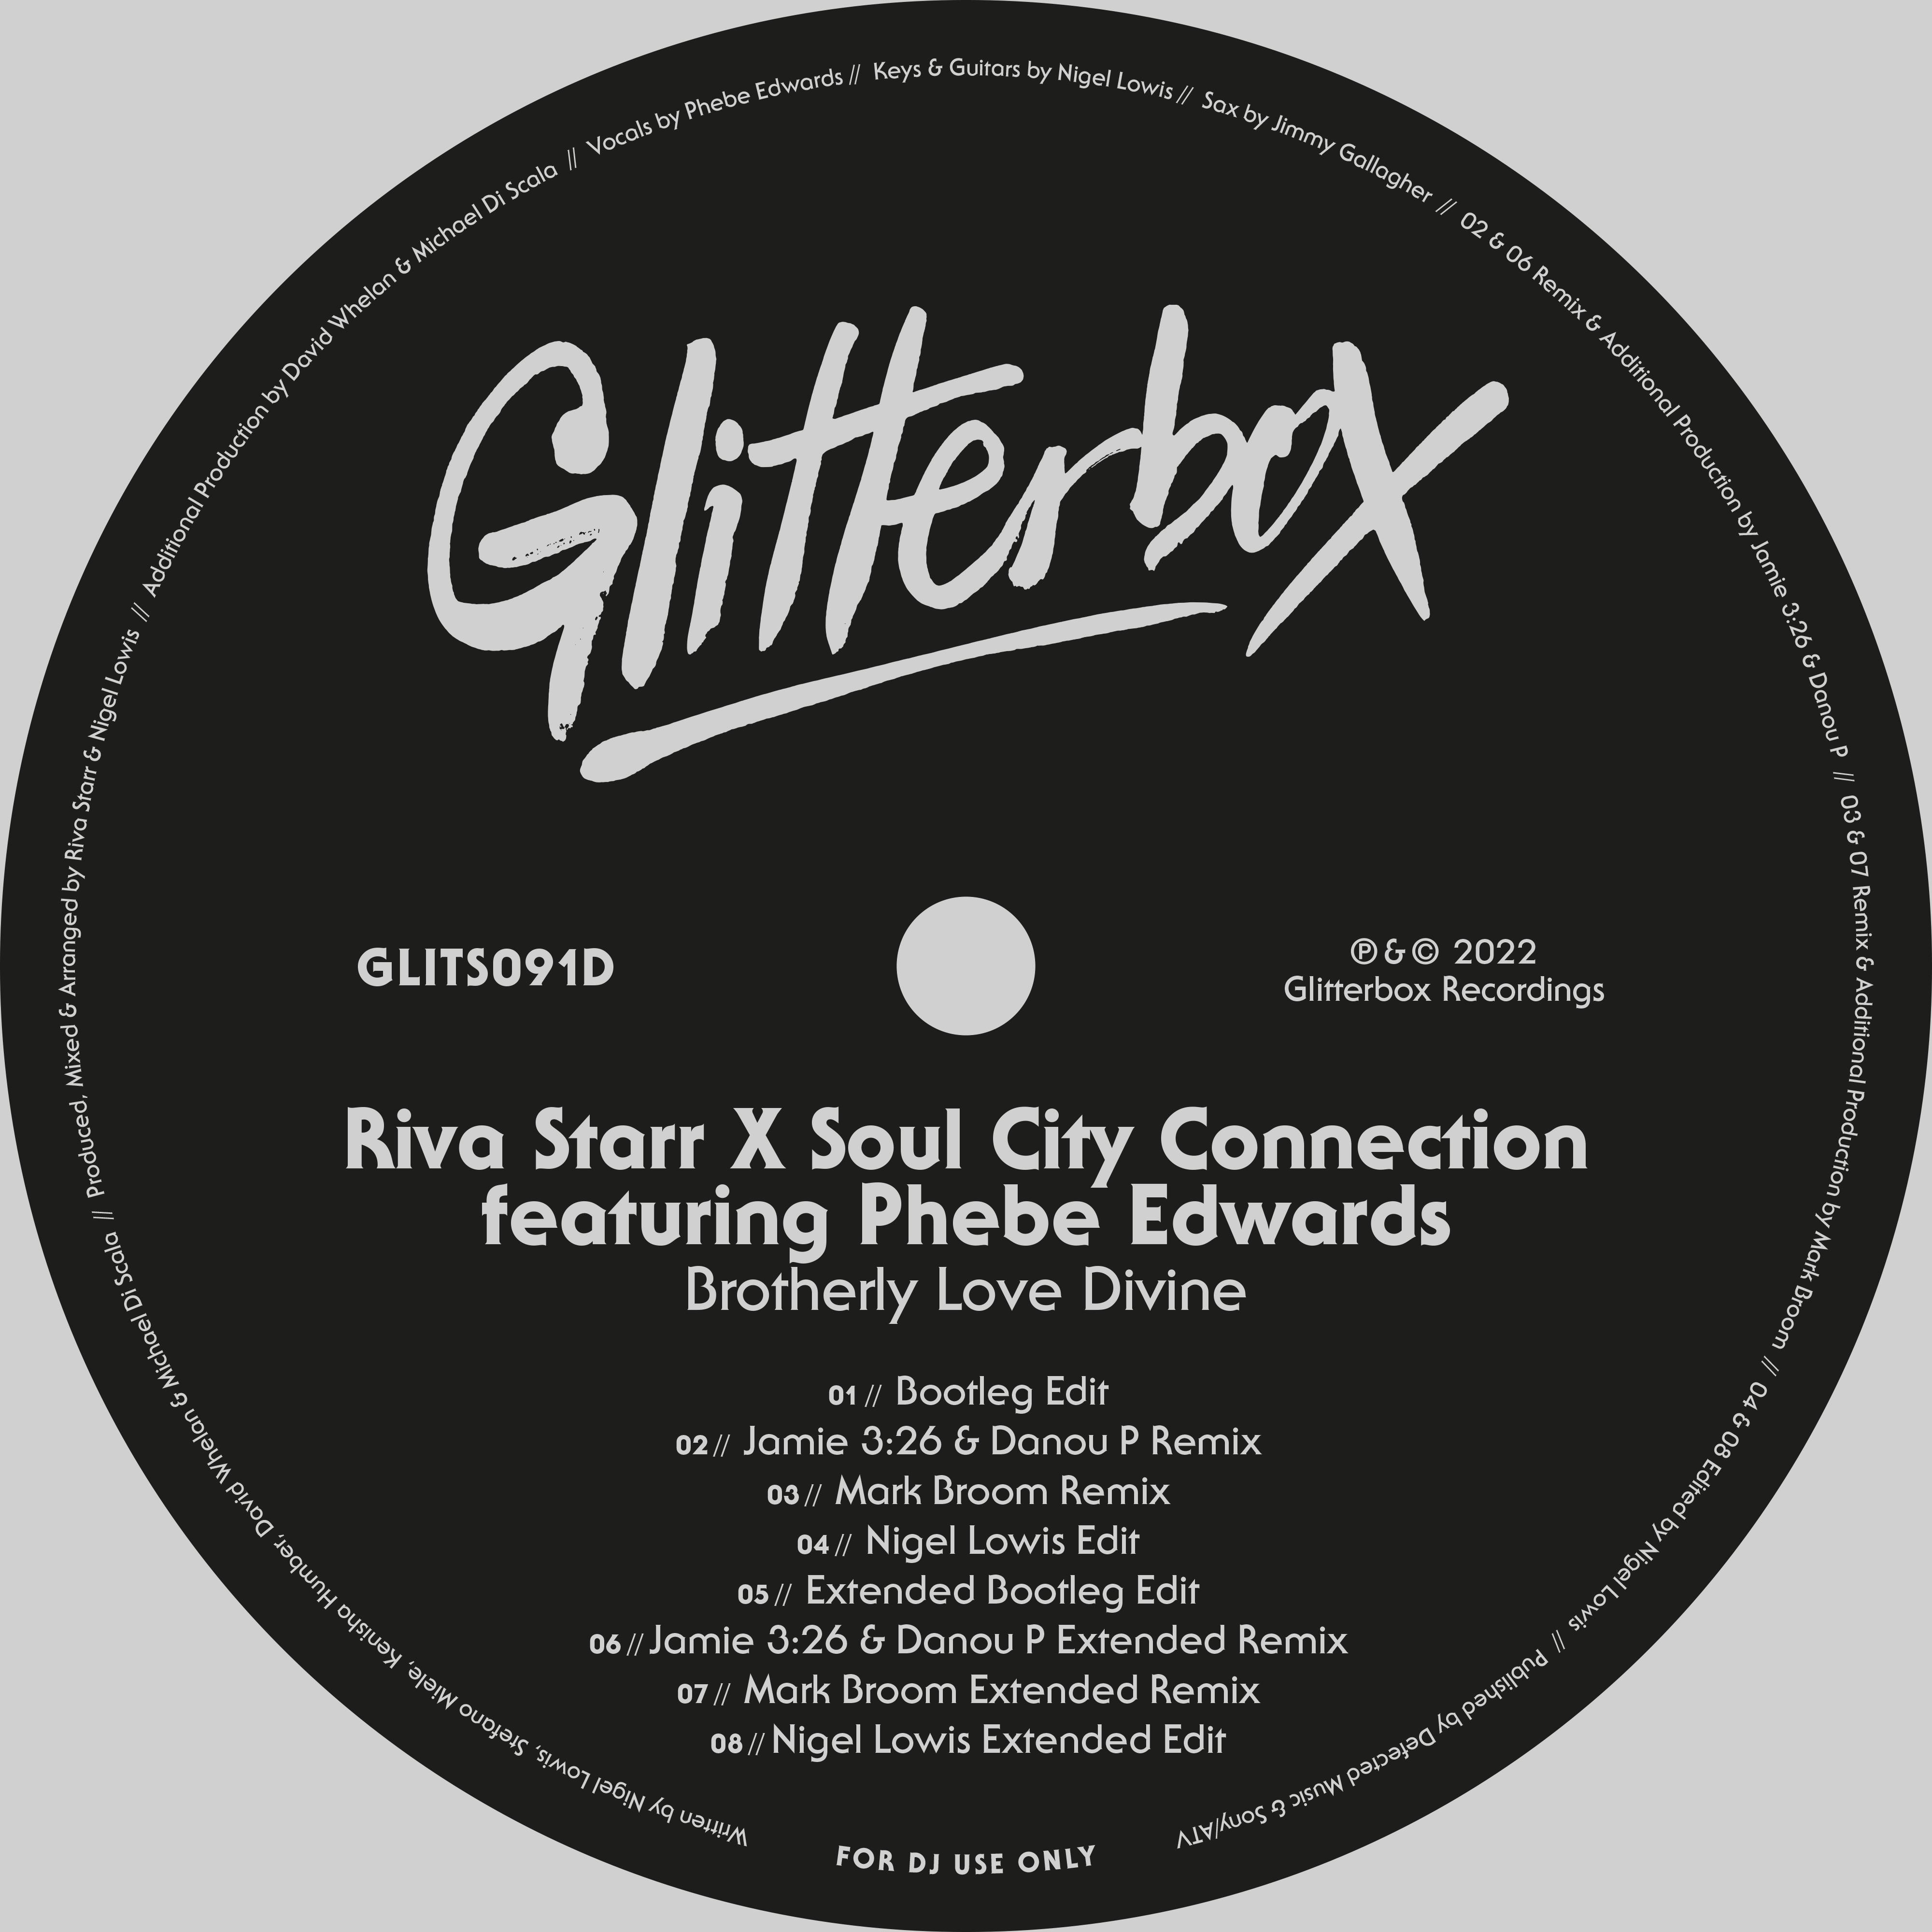 Riva Starr - Brotherly Love Divine (feat. Phebe Edwards) [Jamie 3:26 & Danou P Extended Remix]